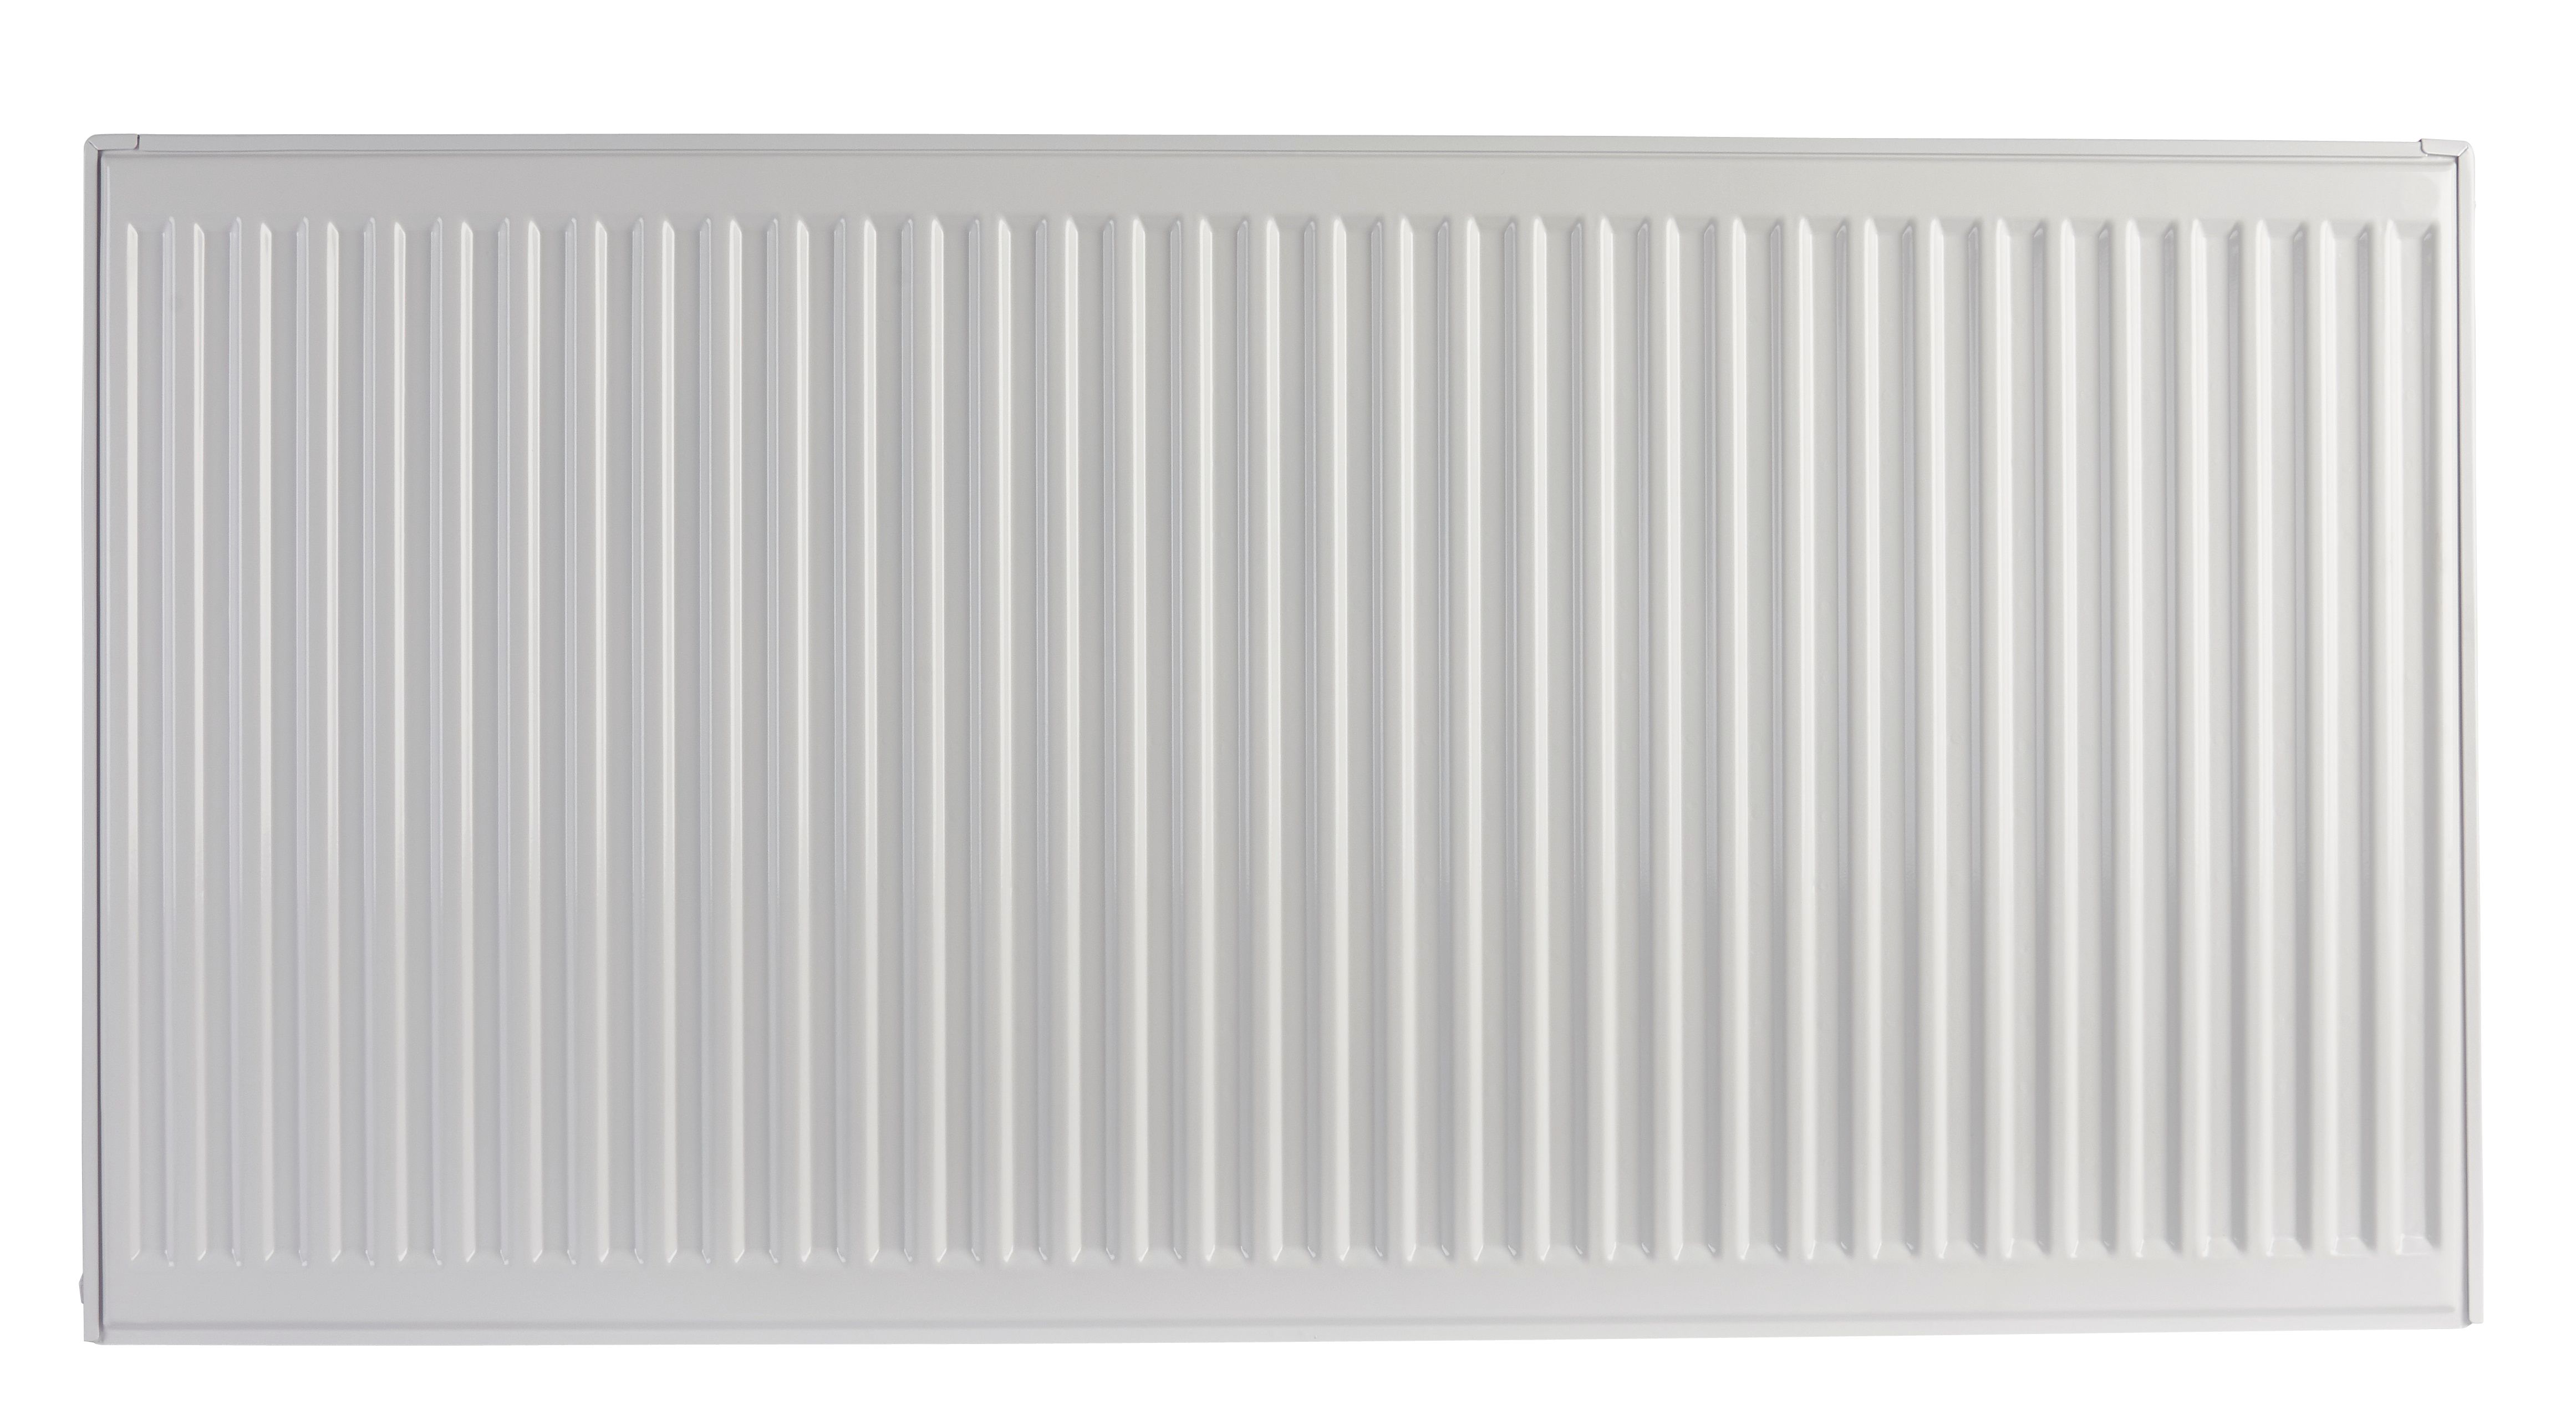 Image of Homeline by Stelrad 500 x 600mm Type 21 Double Panel Plus Single Convector Radiator